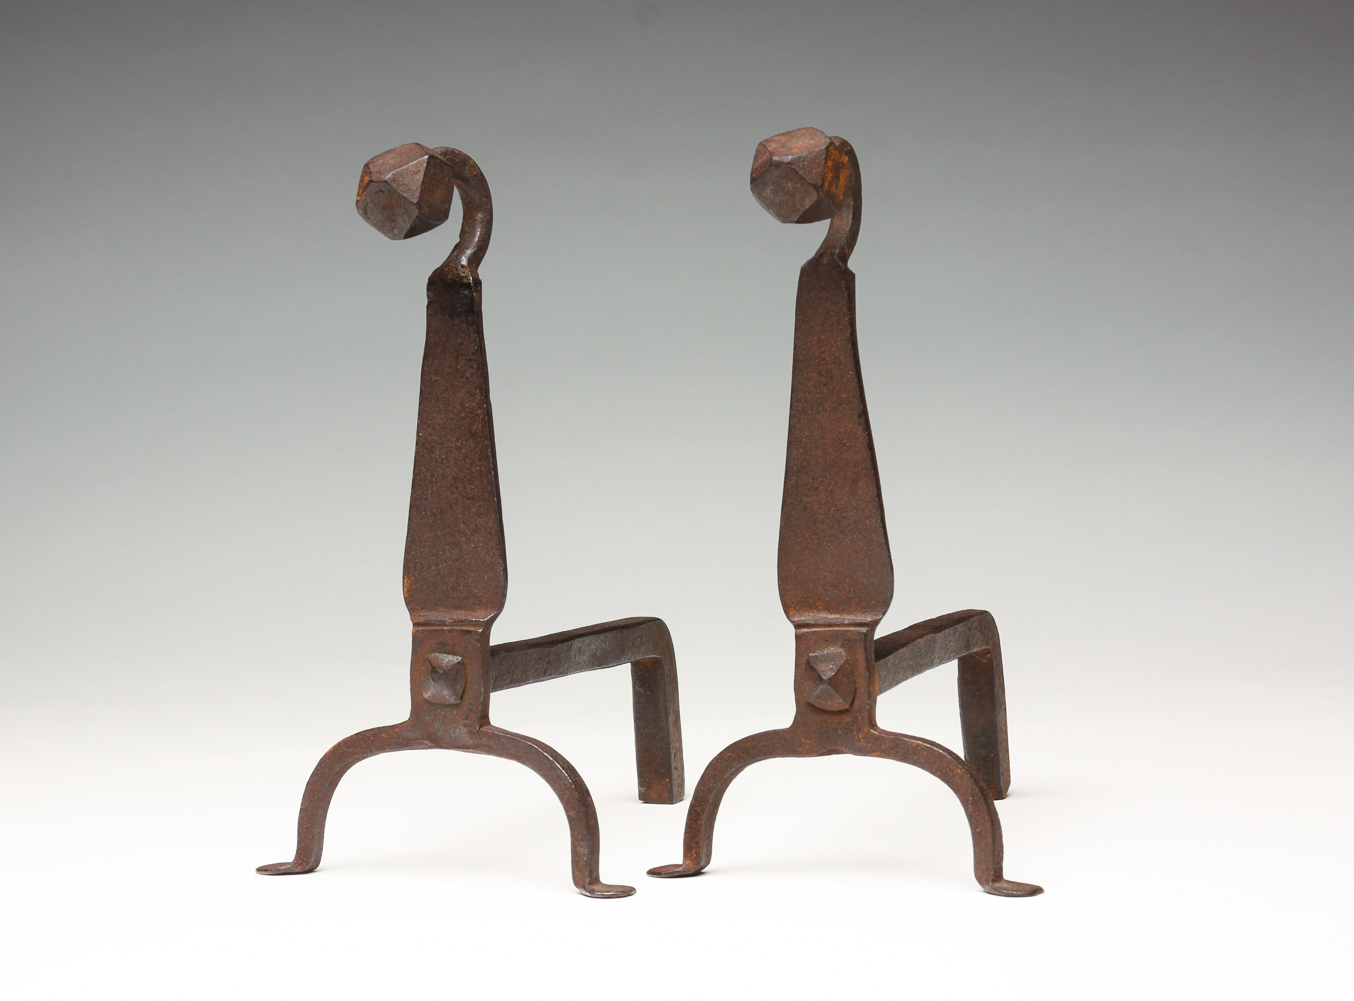 PAIR OF AMERICAN MINIATURE WROUGHT